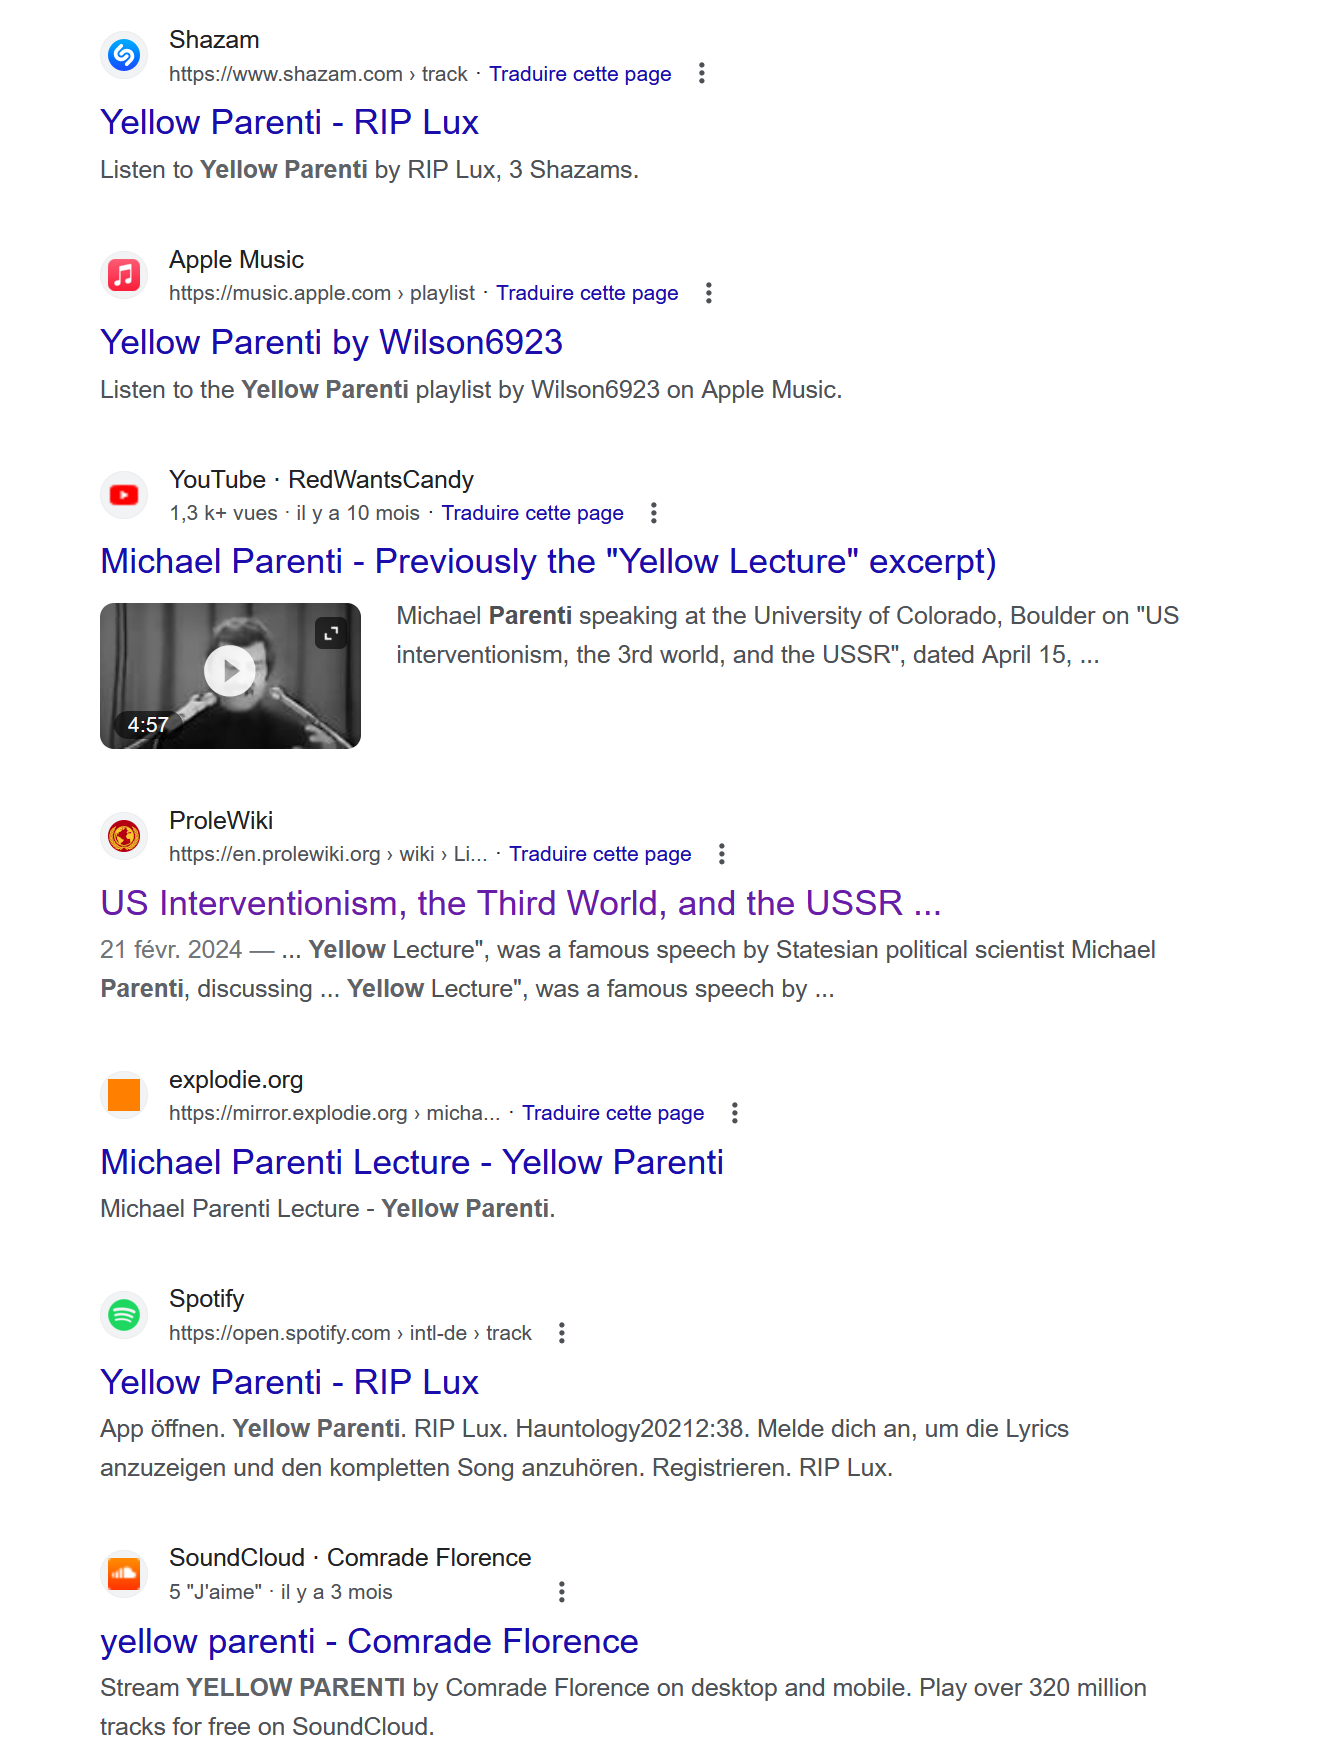 Search results example on Google with the keyword "yellow parenti", showing ProleWiki appearing in 11th place.